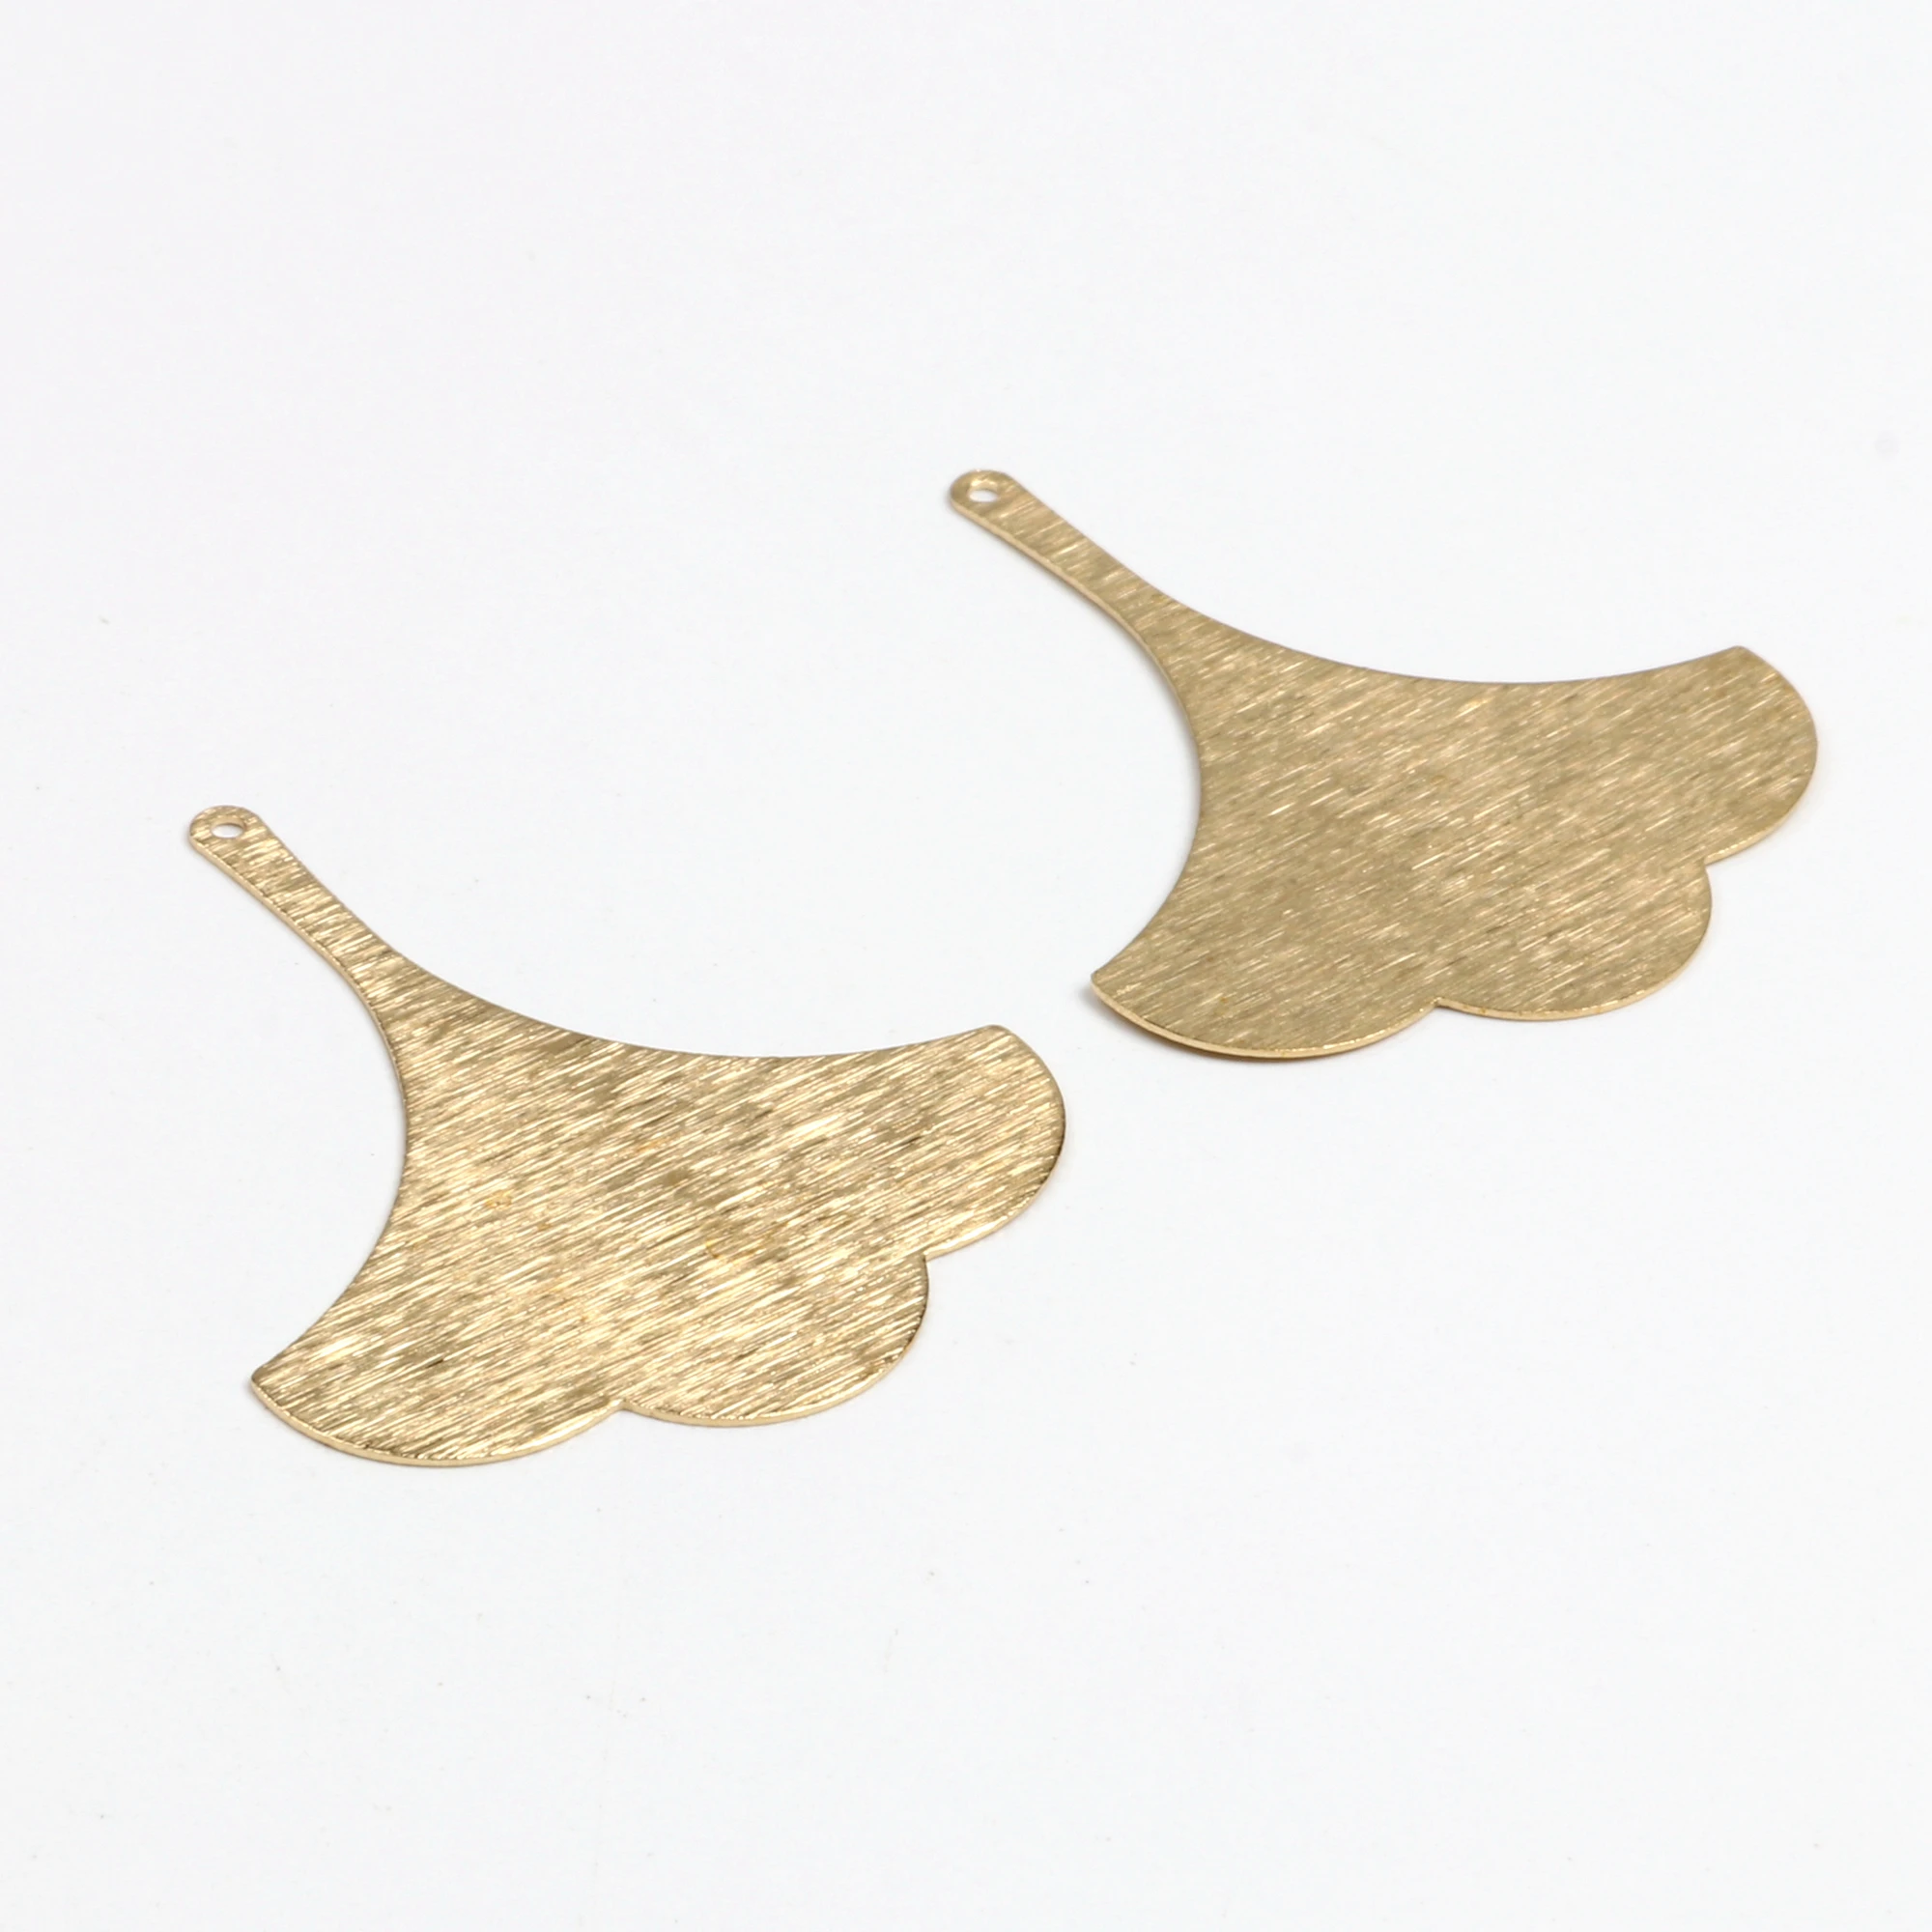 

Brass Textured Charms, Raw Brass Earrings Findings,Raw Brass Pendant,Leaf shaped Earrings Brass Charm,37.5x31mm-RB1321